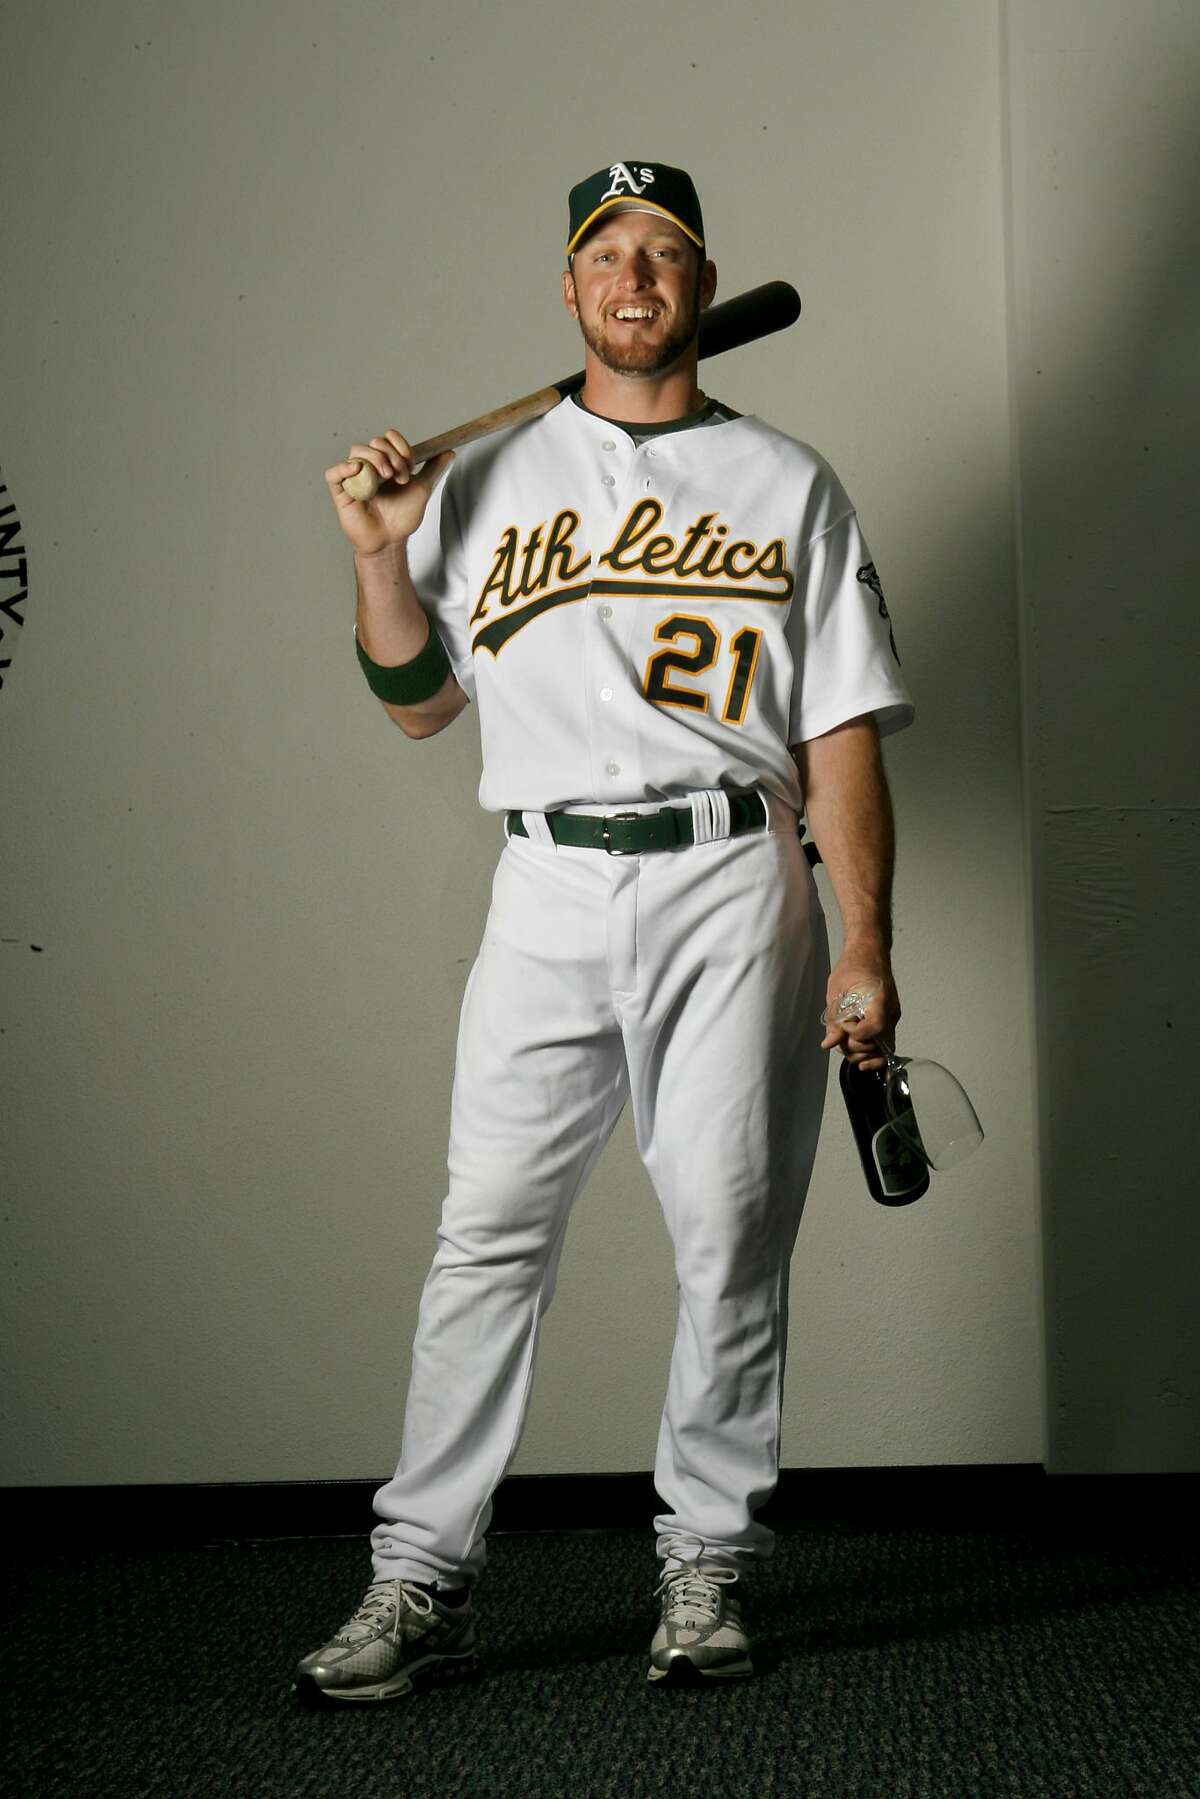 QUARRY_134_KW_.jpg Oakland Athletics center fielder #21 Mark Kotsay poses with a bottle of wine at McAfee Coliseum in Oakland Tuesday August 15, 2006. Kat Wade/The Chronicle **Mark Kotsay (Subject) cq